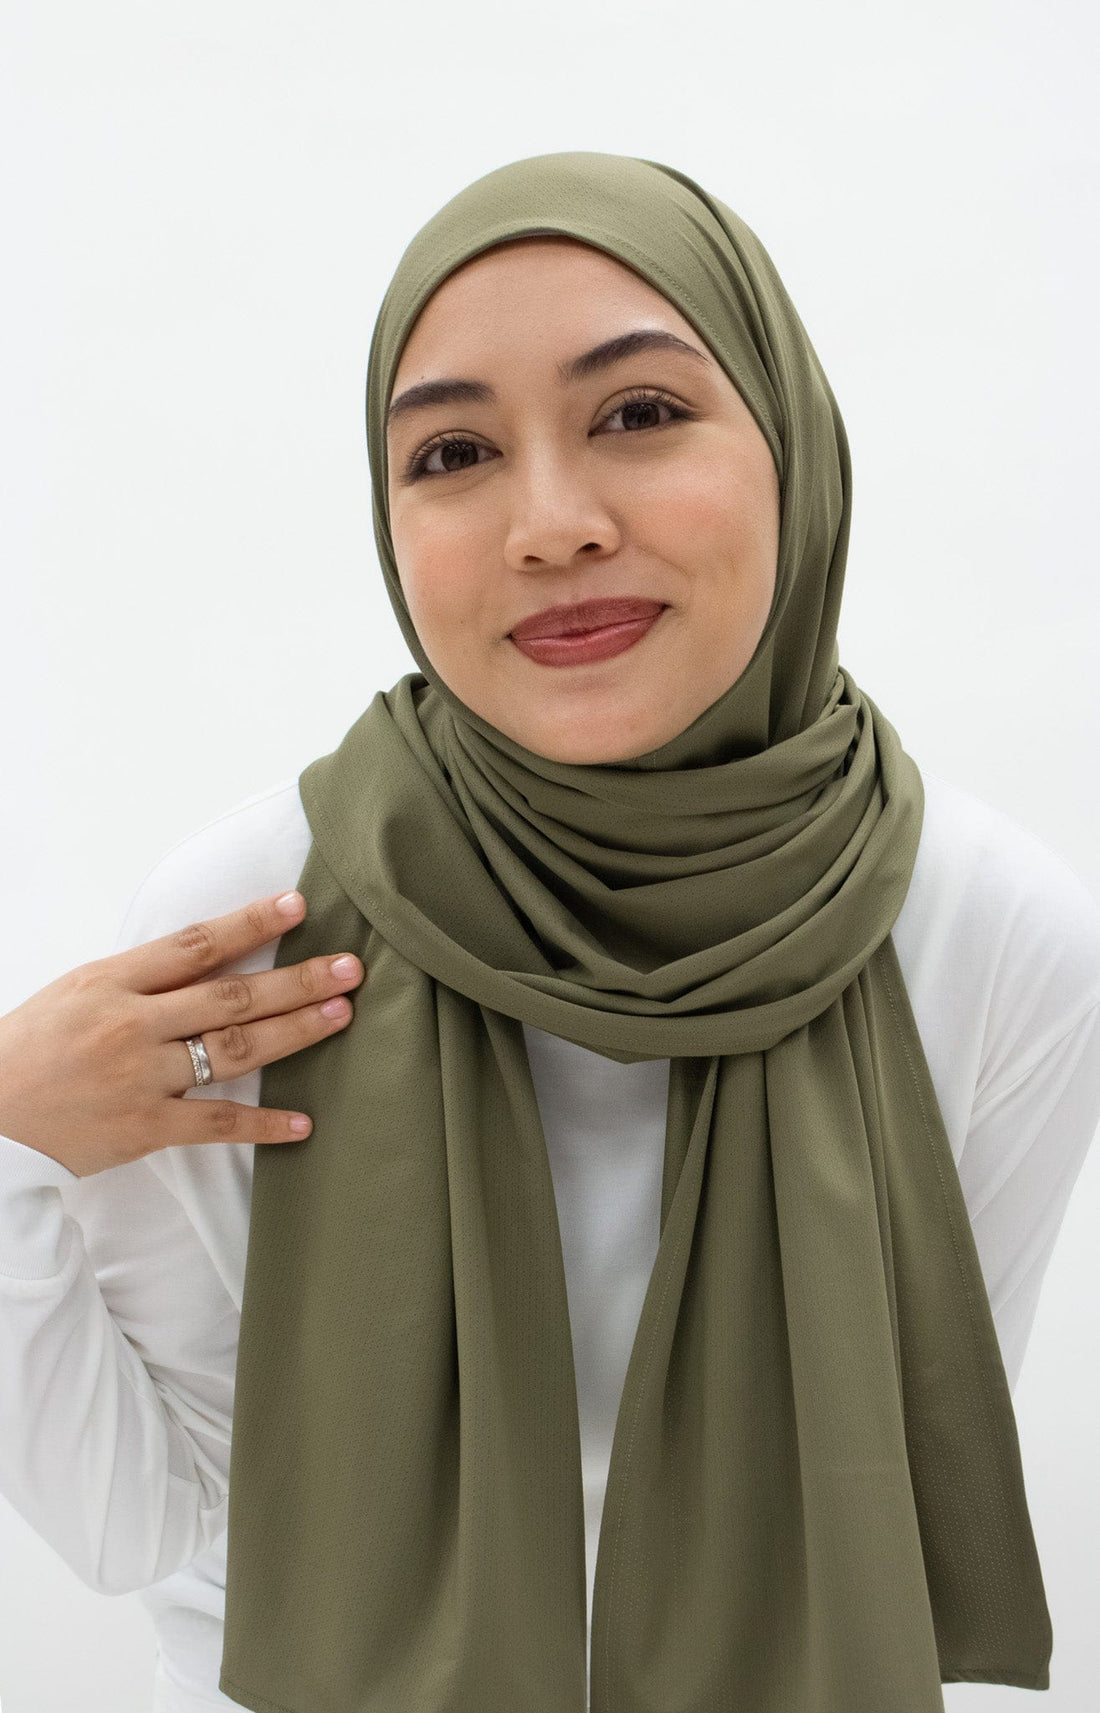 Sports Hijabs GLOWco Exclusive Wrap Shawl in Pale Olive